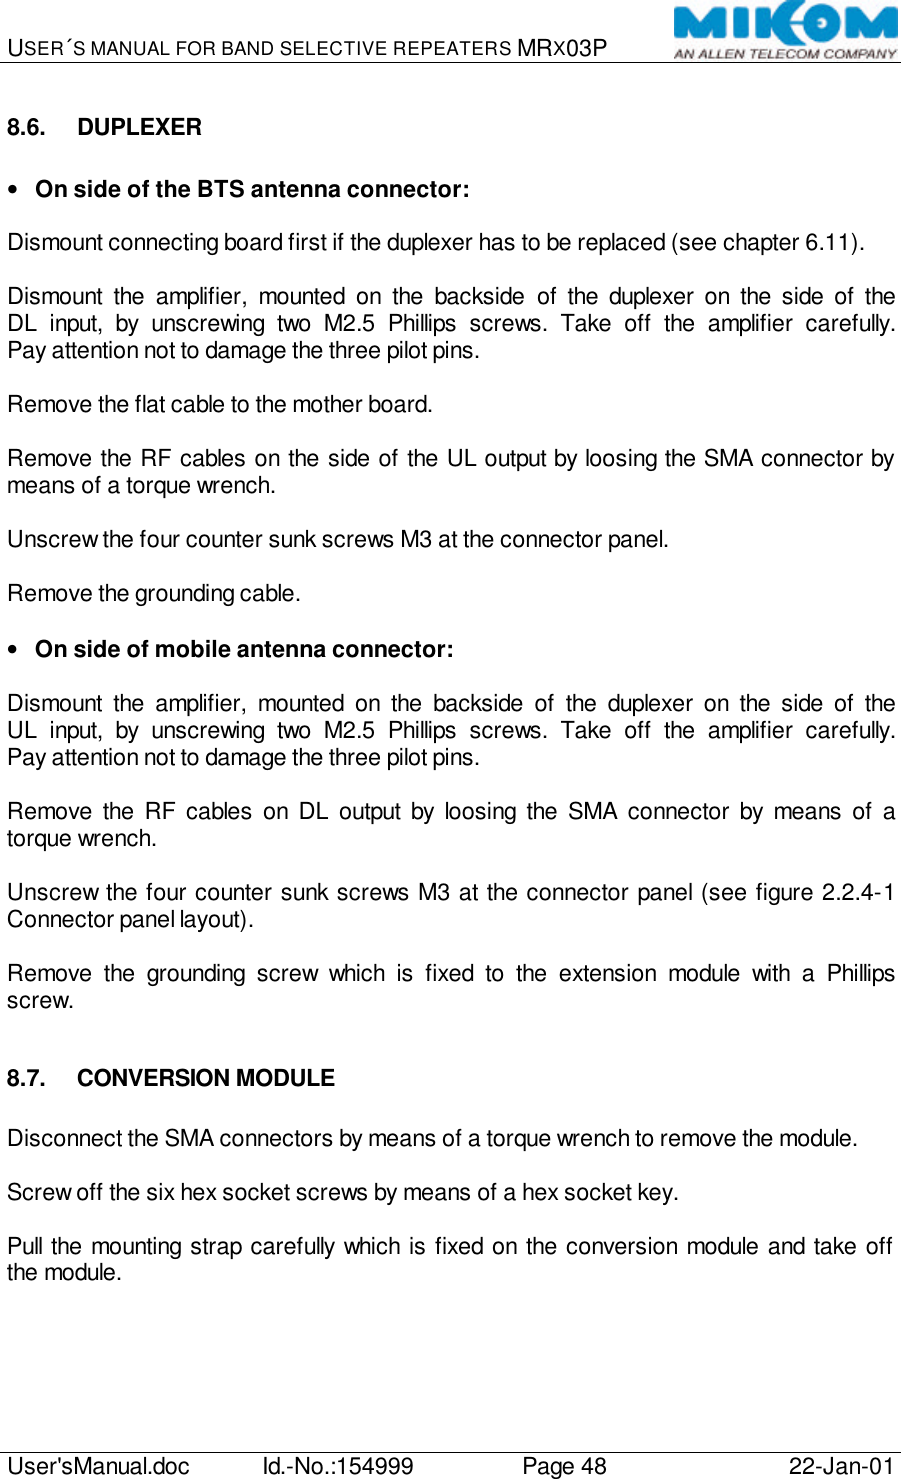 USER´S MANUAL FOR BAND SELECTIVE REPEATERS MRX03P   User&apos;sManual.doc Id.-No.:154999 Page 48 22-Jan-01  8.6. DUPLEXER  • On side of the BTS antenna connector:  Dismount connecting board first if the duplexer has to be replaced (see chapter 6.11).  Dismount the amplifier, mounted on the backside of the duplexer on the side of the DL input, by unscrewing two M2.5 Phillips screws. Take off the amplifier carefully. Pay attention not to damage the three pilot pins.  Remove the flat cable to the mother board.  Remove the RF cables on the side of the UL output by loosing the SMA connector by means of a torque wrench.  Unscrew the four counter sunk screws M3 at the connector panel.  Remove the grounding cable.  • On side of mobile antenna connector:  Dismount the amplifier, mounted on the backside of the duplexer on the side of the UL input, by unscrewing two M2.5 Phillips screws. Take off the amplifier carefully. Pay attention not to damage the three pilot pins.  Remove the RF cables on DL output by loosing the SMA connector by means of a torque wrench.  Unscrew the four counter sunk screws M3 at the connector panel (see figure 2.2.4-1 Connector panel layout).  Remove the grounding screw which is fixed to the extension module with a Phillips screw.  8.7. CONVERSION MODULE  Disconnect the SMA connectors by means of a torque wrench to remove the module.  Screw off the six hex socket screws by means of a hex socket key.  Pull the mounting strap carefully which is fixed on the conversion module and take off the module.  